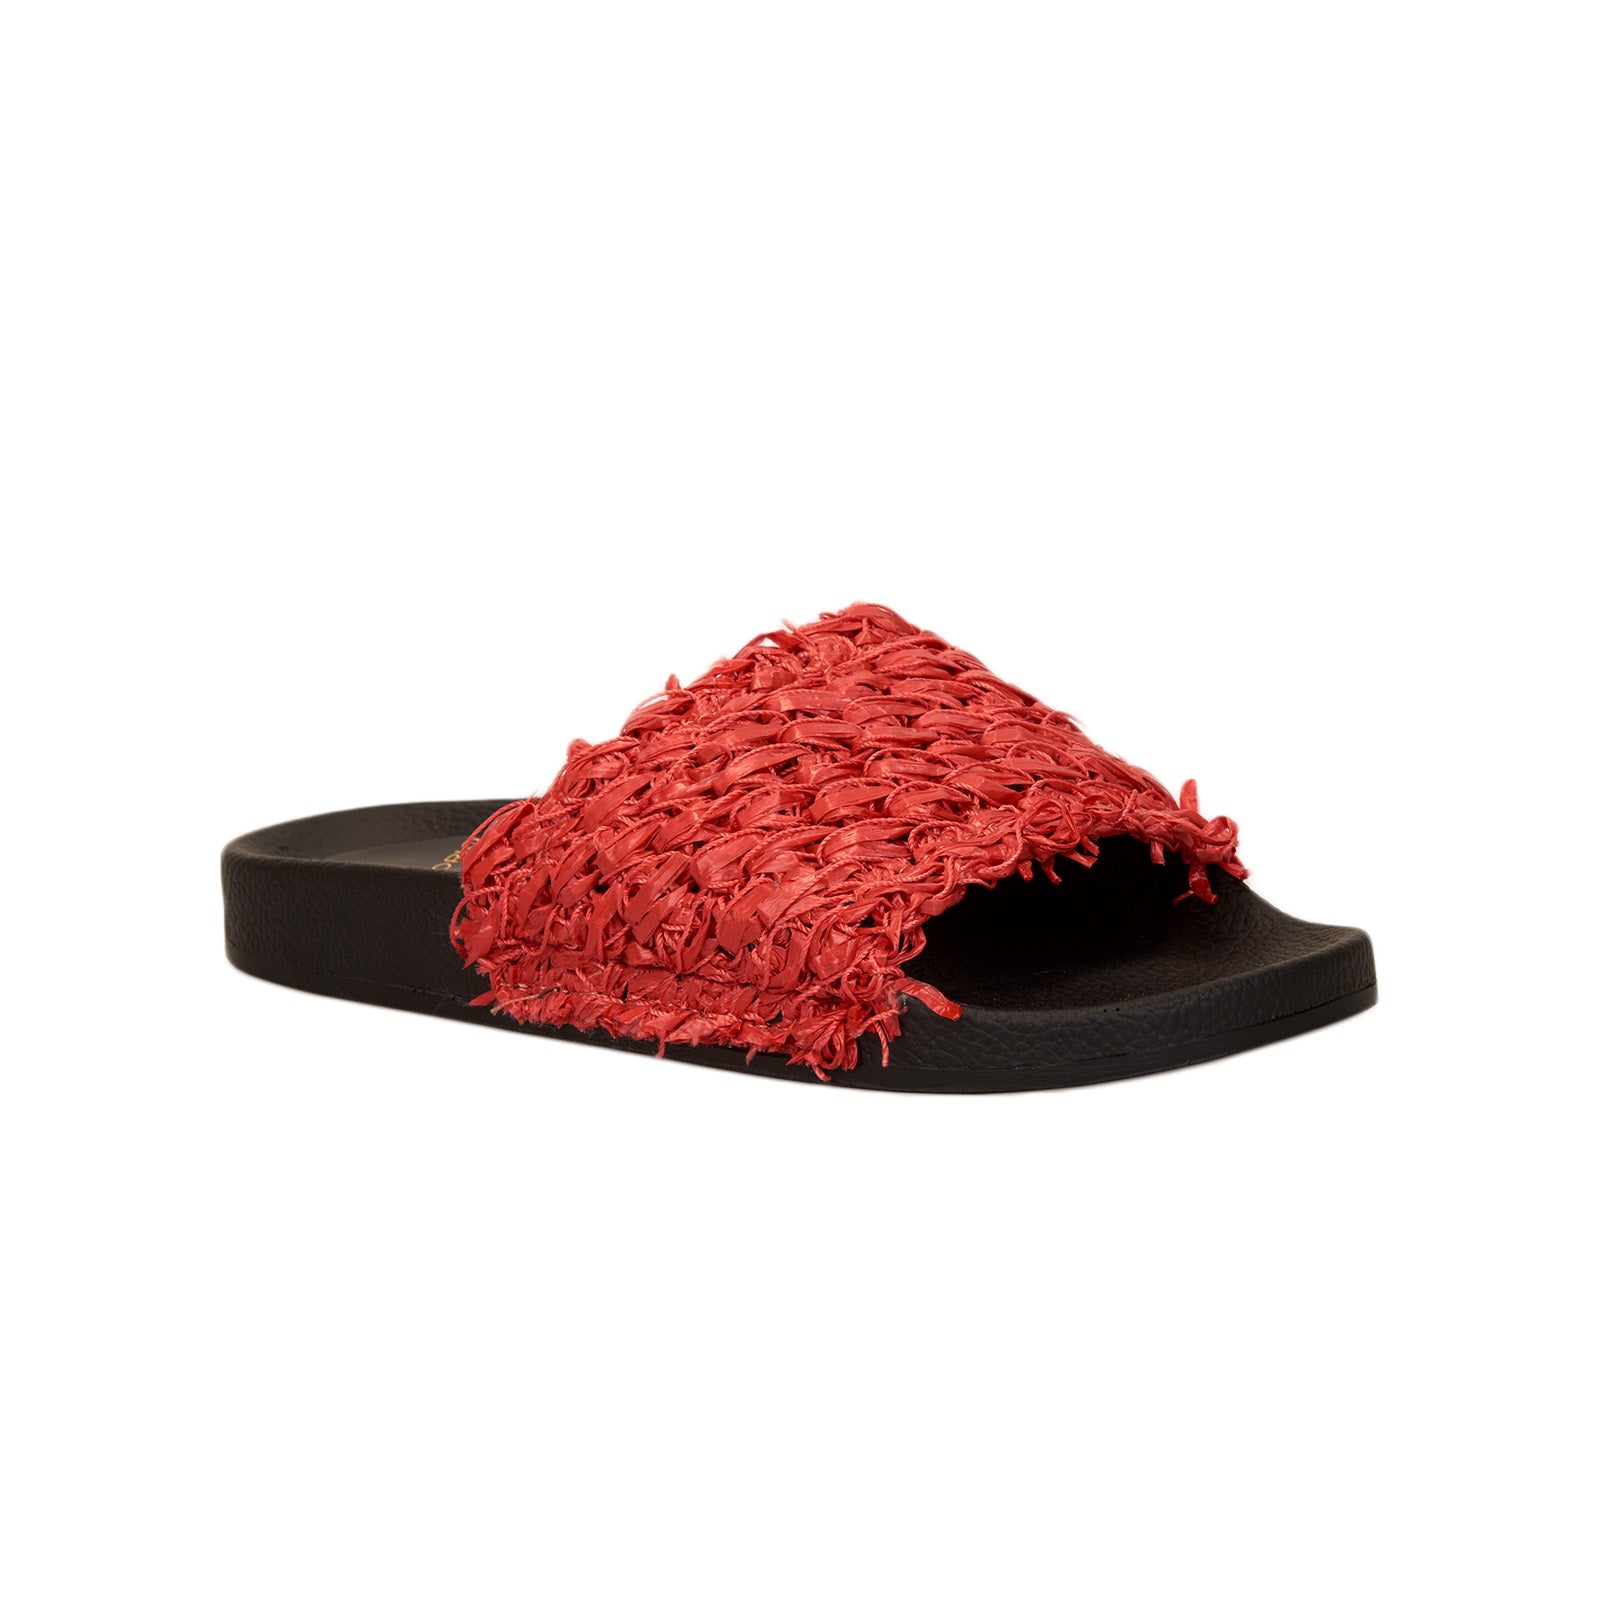 Coco Slide - Poppy Red - Last Pair - Size 36